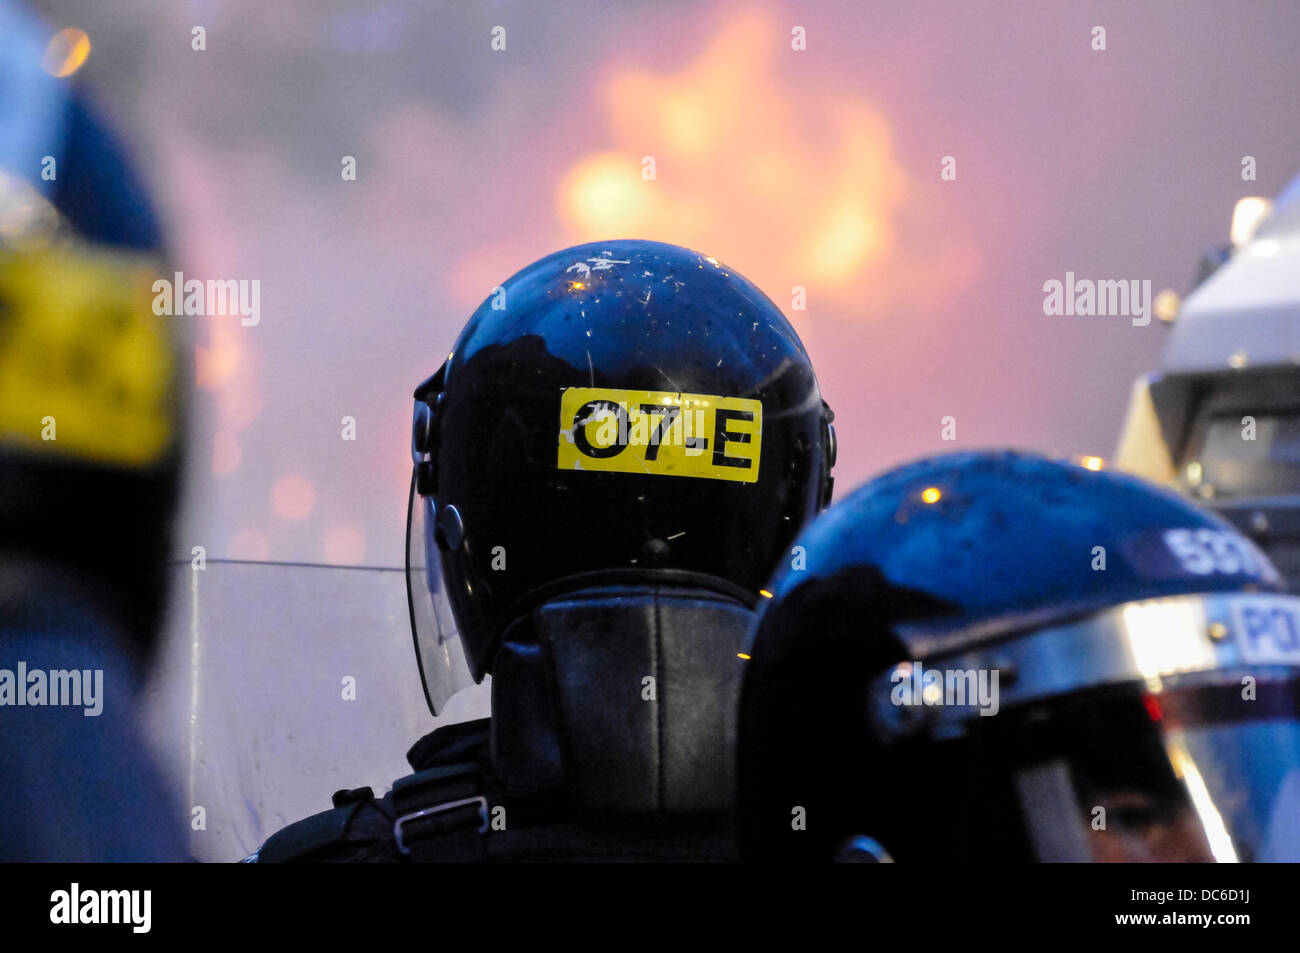 Belfast, Northern Ireland. 9th August 2013 - PSNI officers look on after a crowd of protesting loyalists start a riot against the police and set a van on fire in Belfast Credit:  Stephen Barnes/Alamy Live News Stock Photo